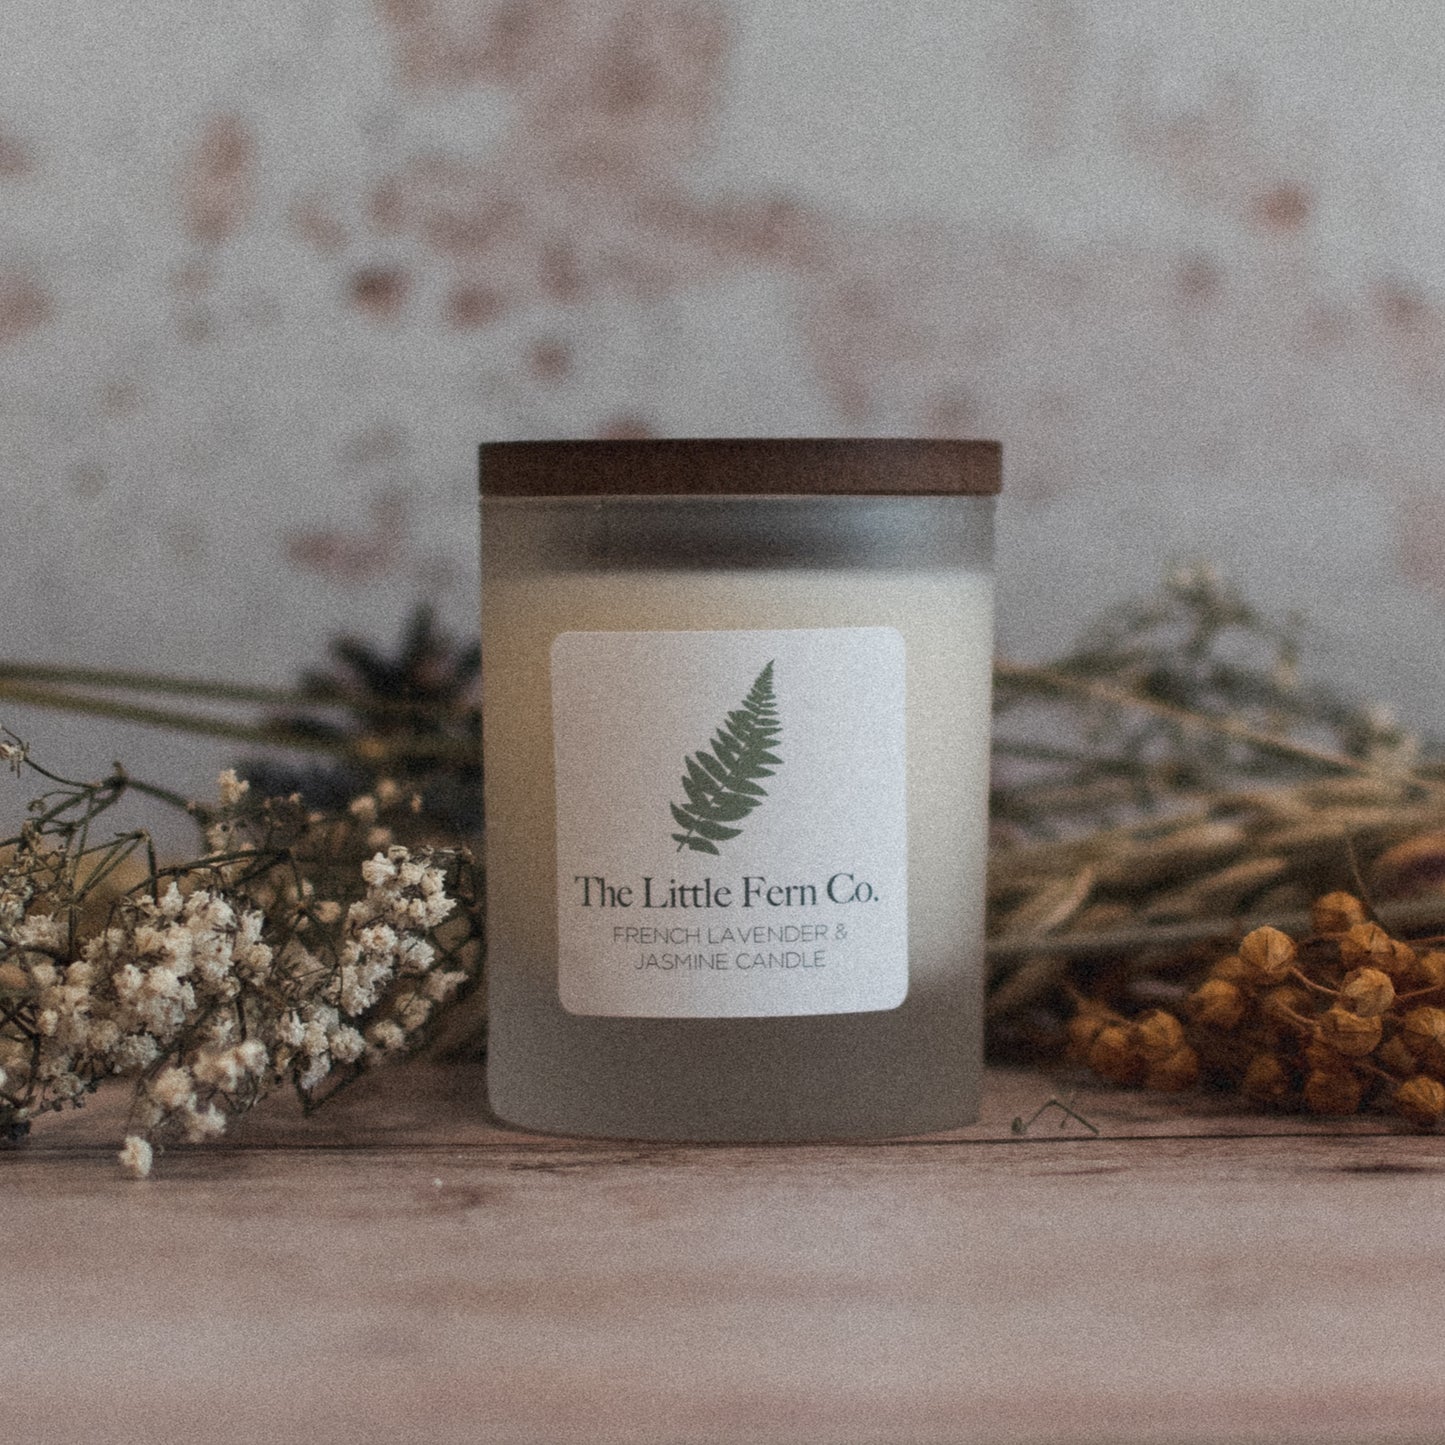 The Little Fern Co French Lavender and Jasmine Candle - Handmade in Yorkshire by F&B Crafts